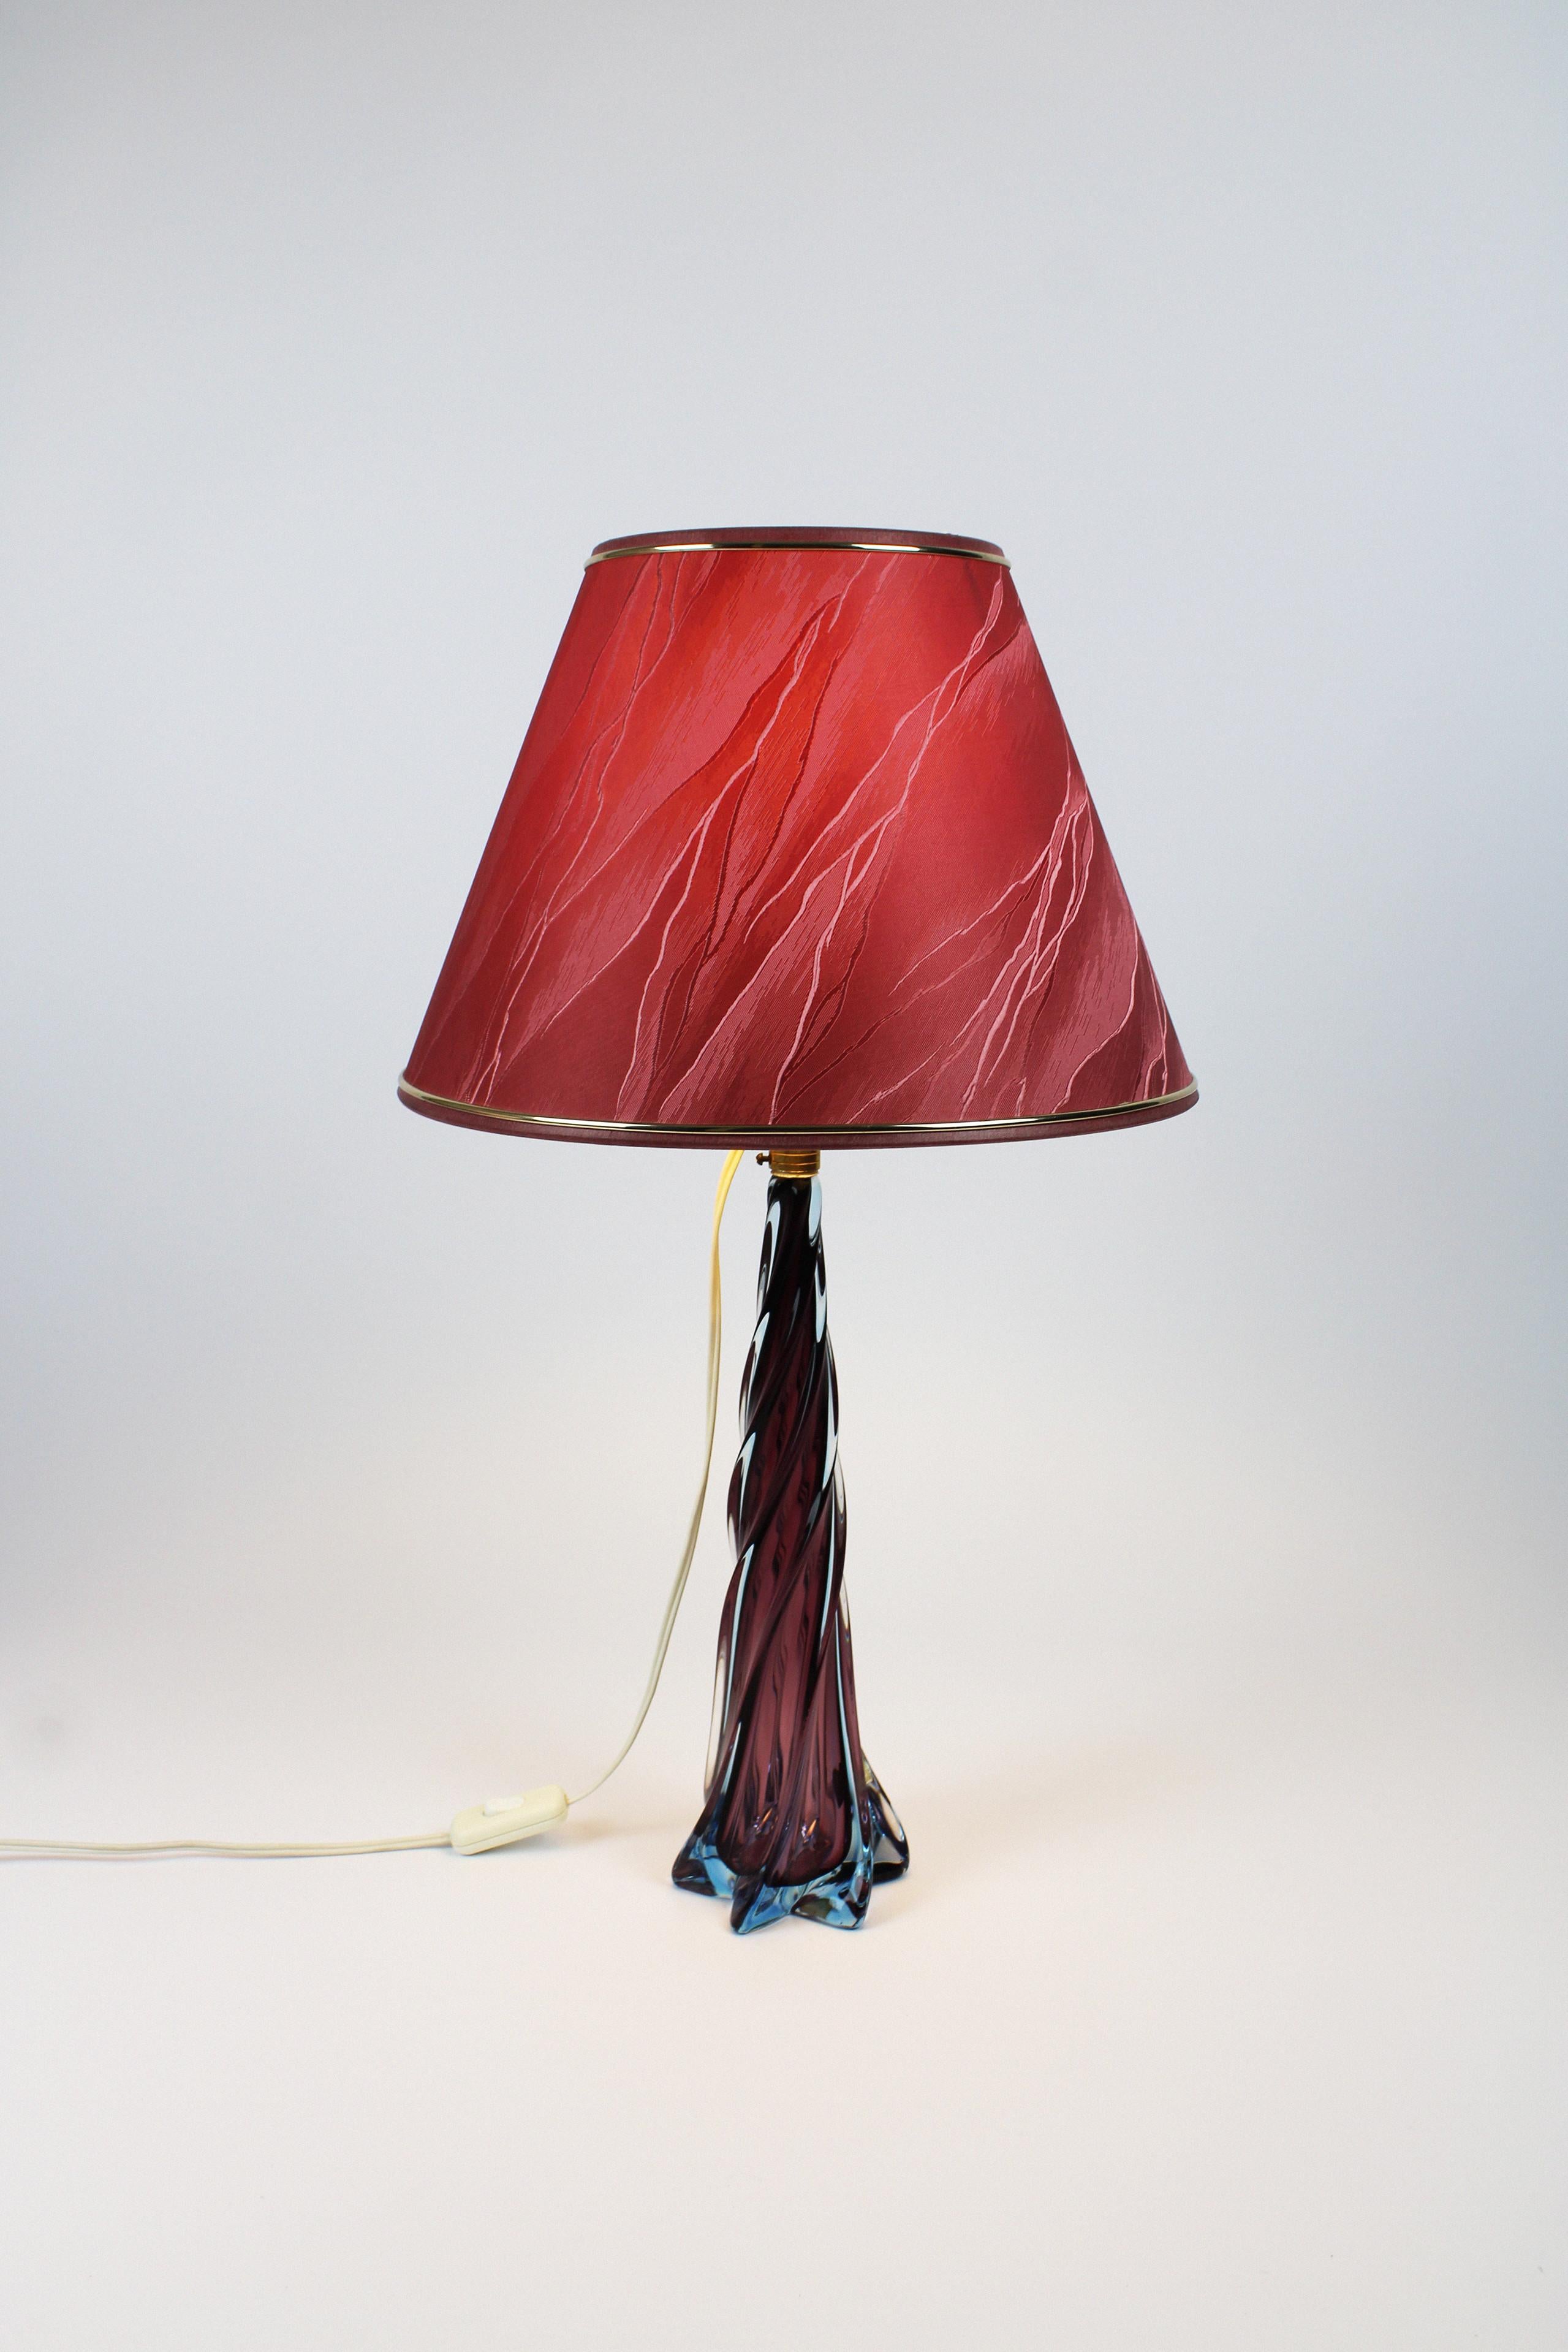 Meet this organic forming table lamp that consists of the rare Artistica Murano CCC & hand-blown Sommerso collection. The Murano glass that is crafted with a warm hue consisting of grape and blue comes and forms the stand in a twisted design. The